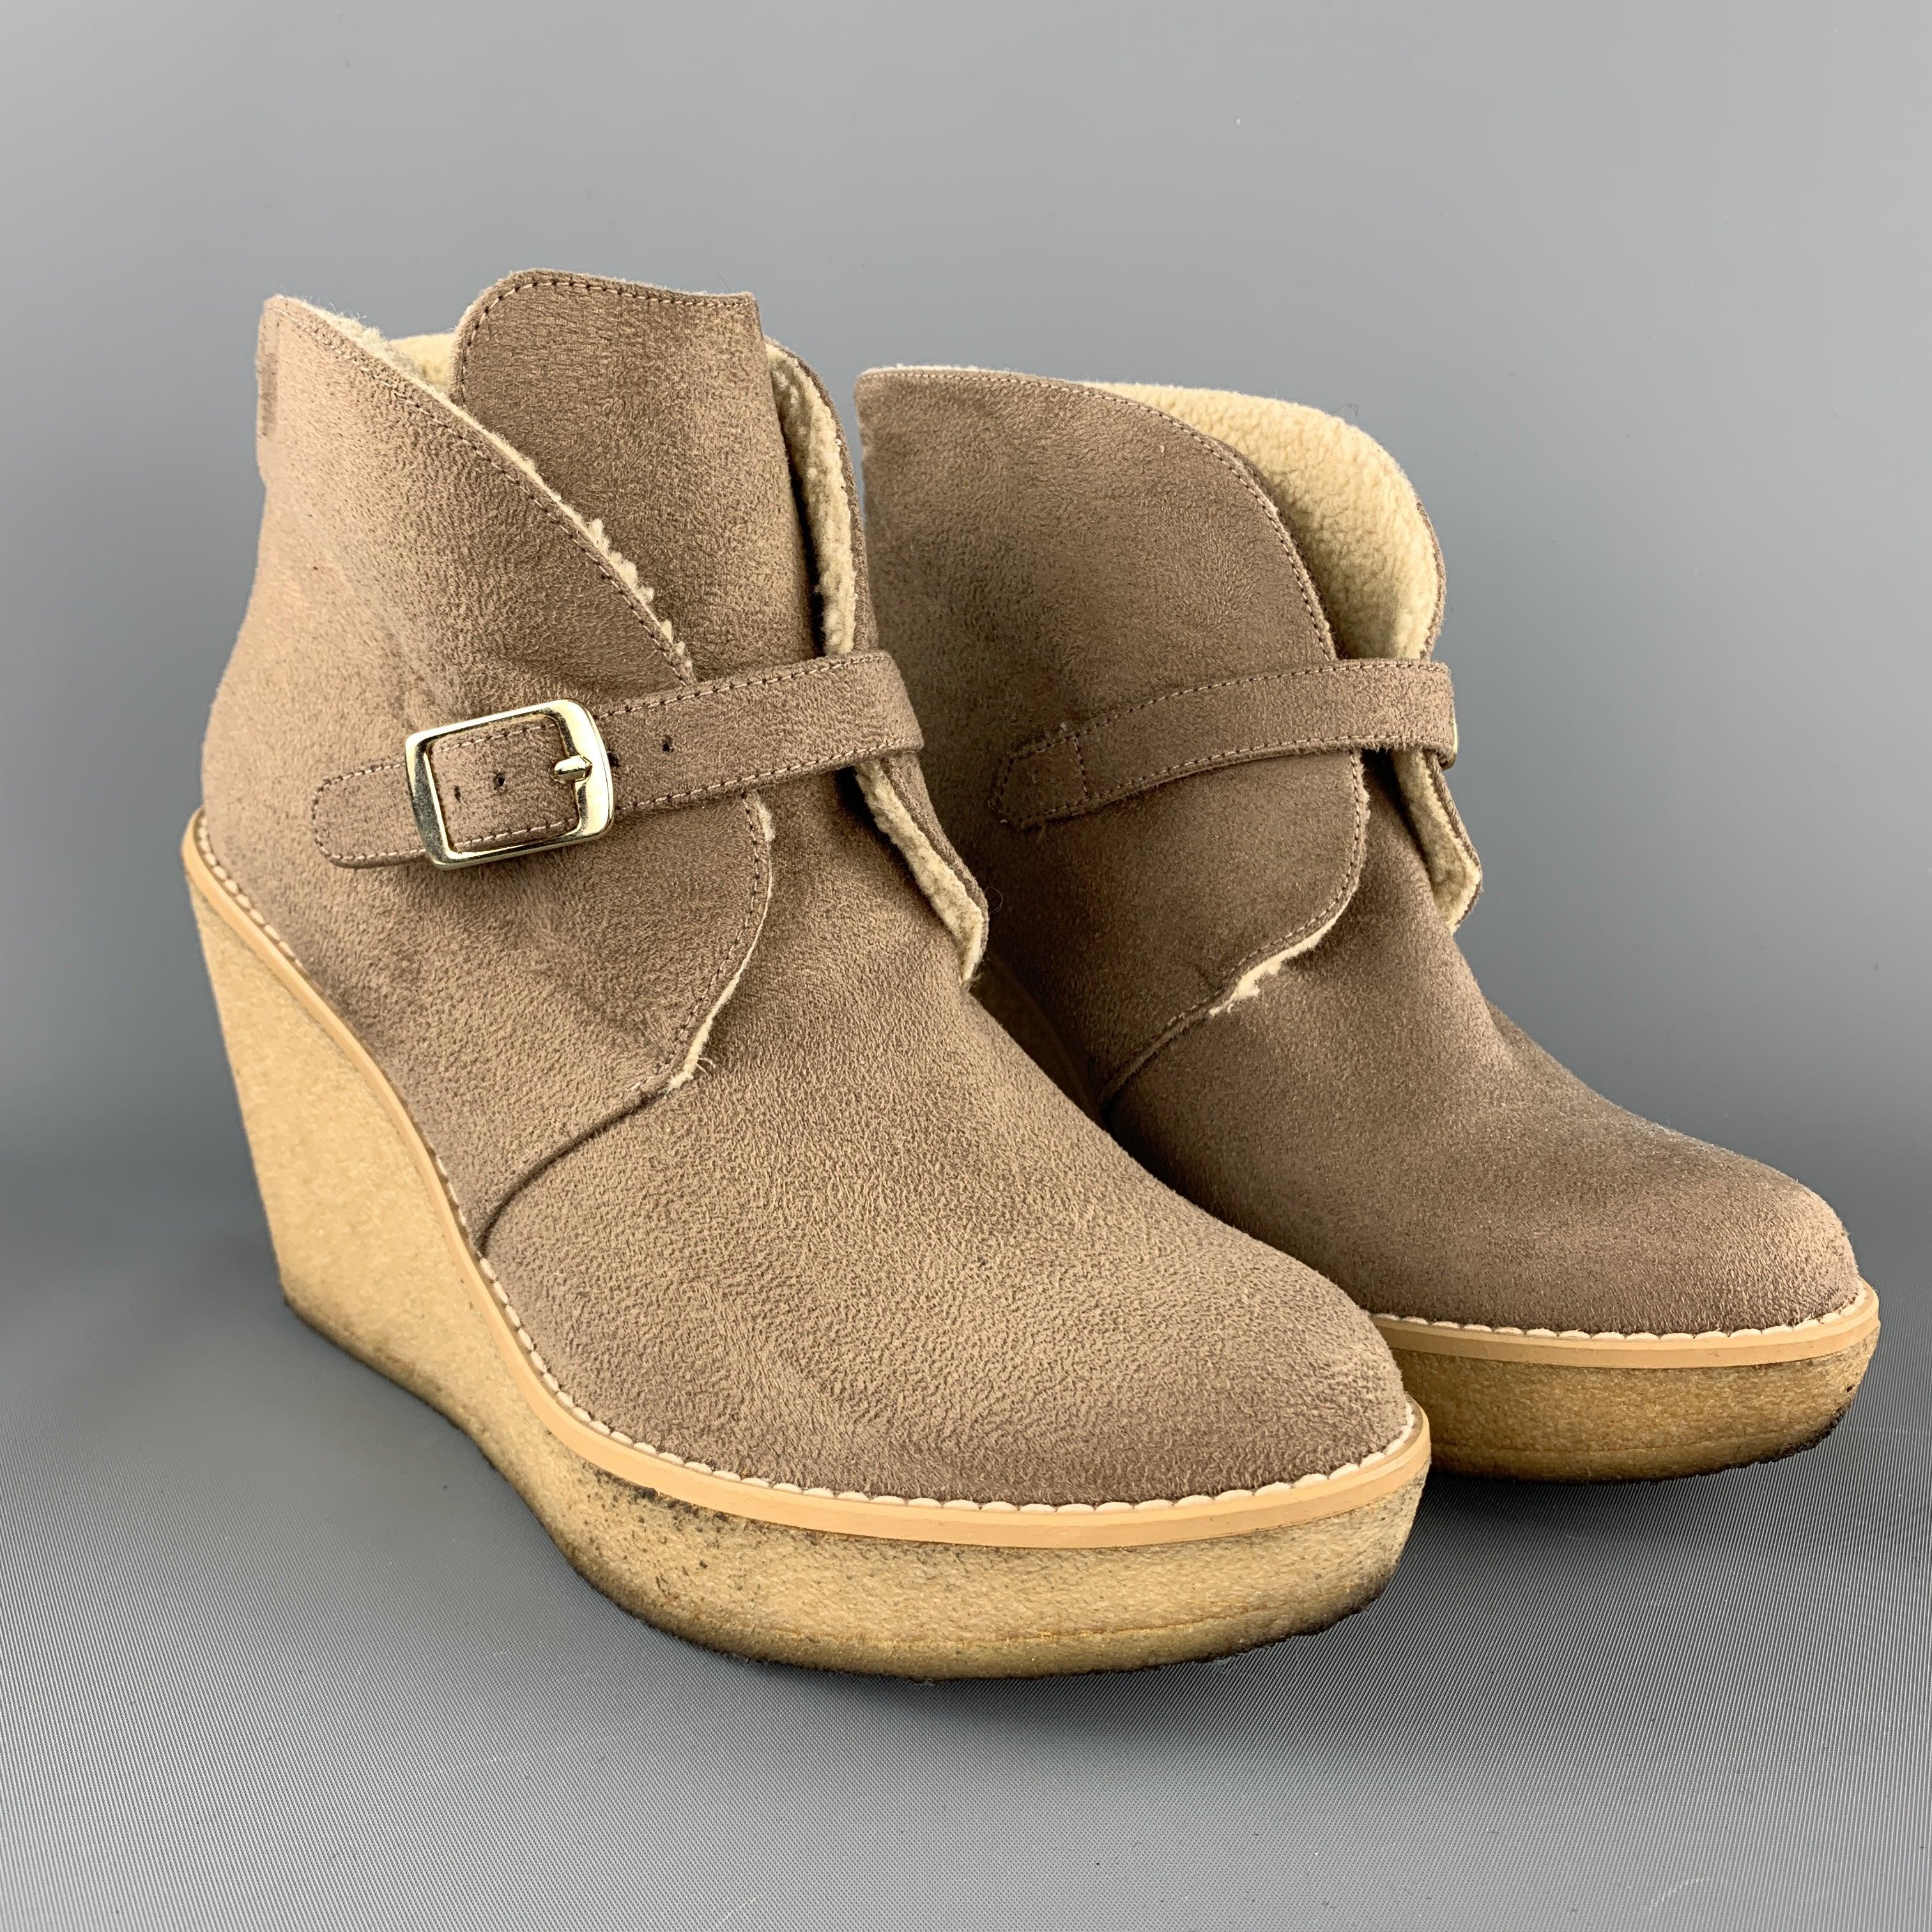 STELLA MCCARTNEY ankle booties come in vegan faux shearling suede with a strap closure and gum wedge sole. Made in Spainches Good
Pre-Owned Condition. 

Marked:   IT 37 

Measurements: 
  Heel:
3.75 inches Platform: 1 inches 
  
  
 
Reference: